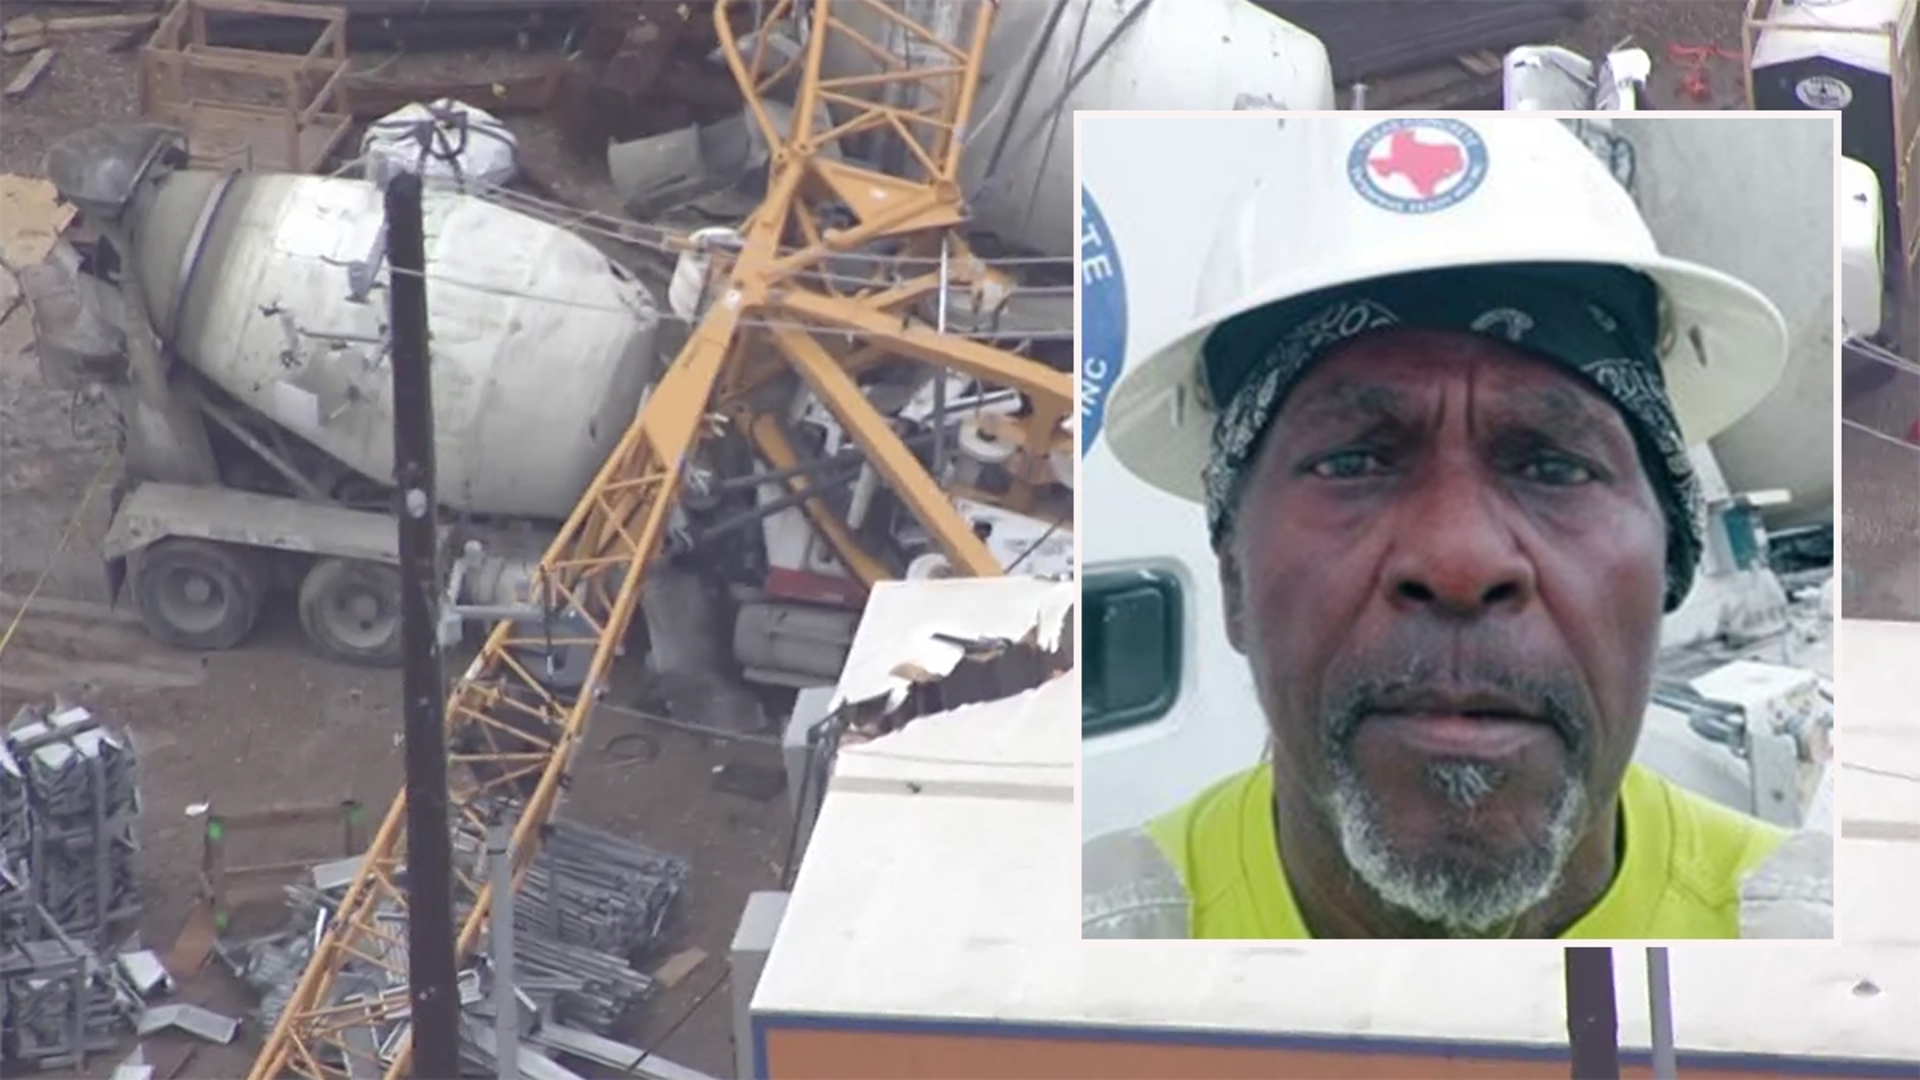 A lawsuit has been filed by a Harris County man who survived a crane collapse during last week’s severe storms. One man was killed when the crane hit their truck.